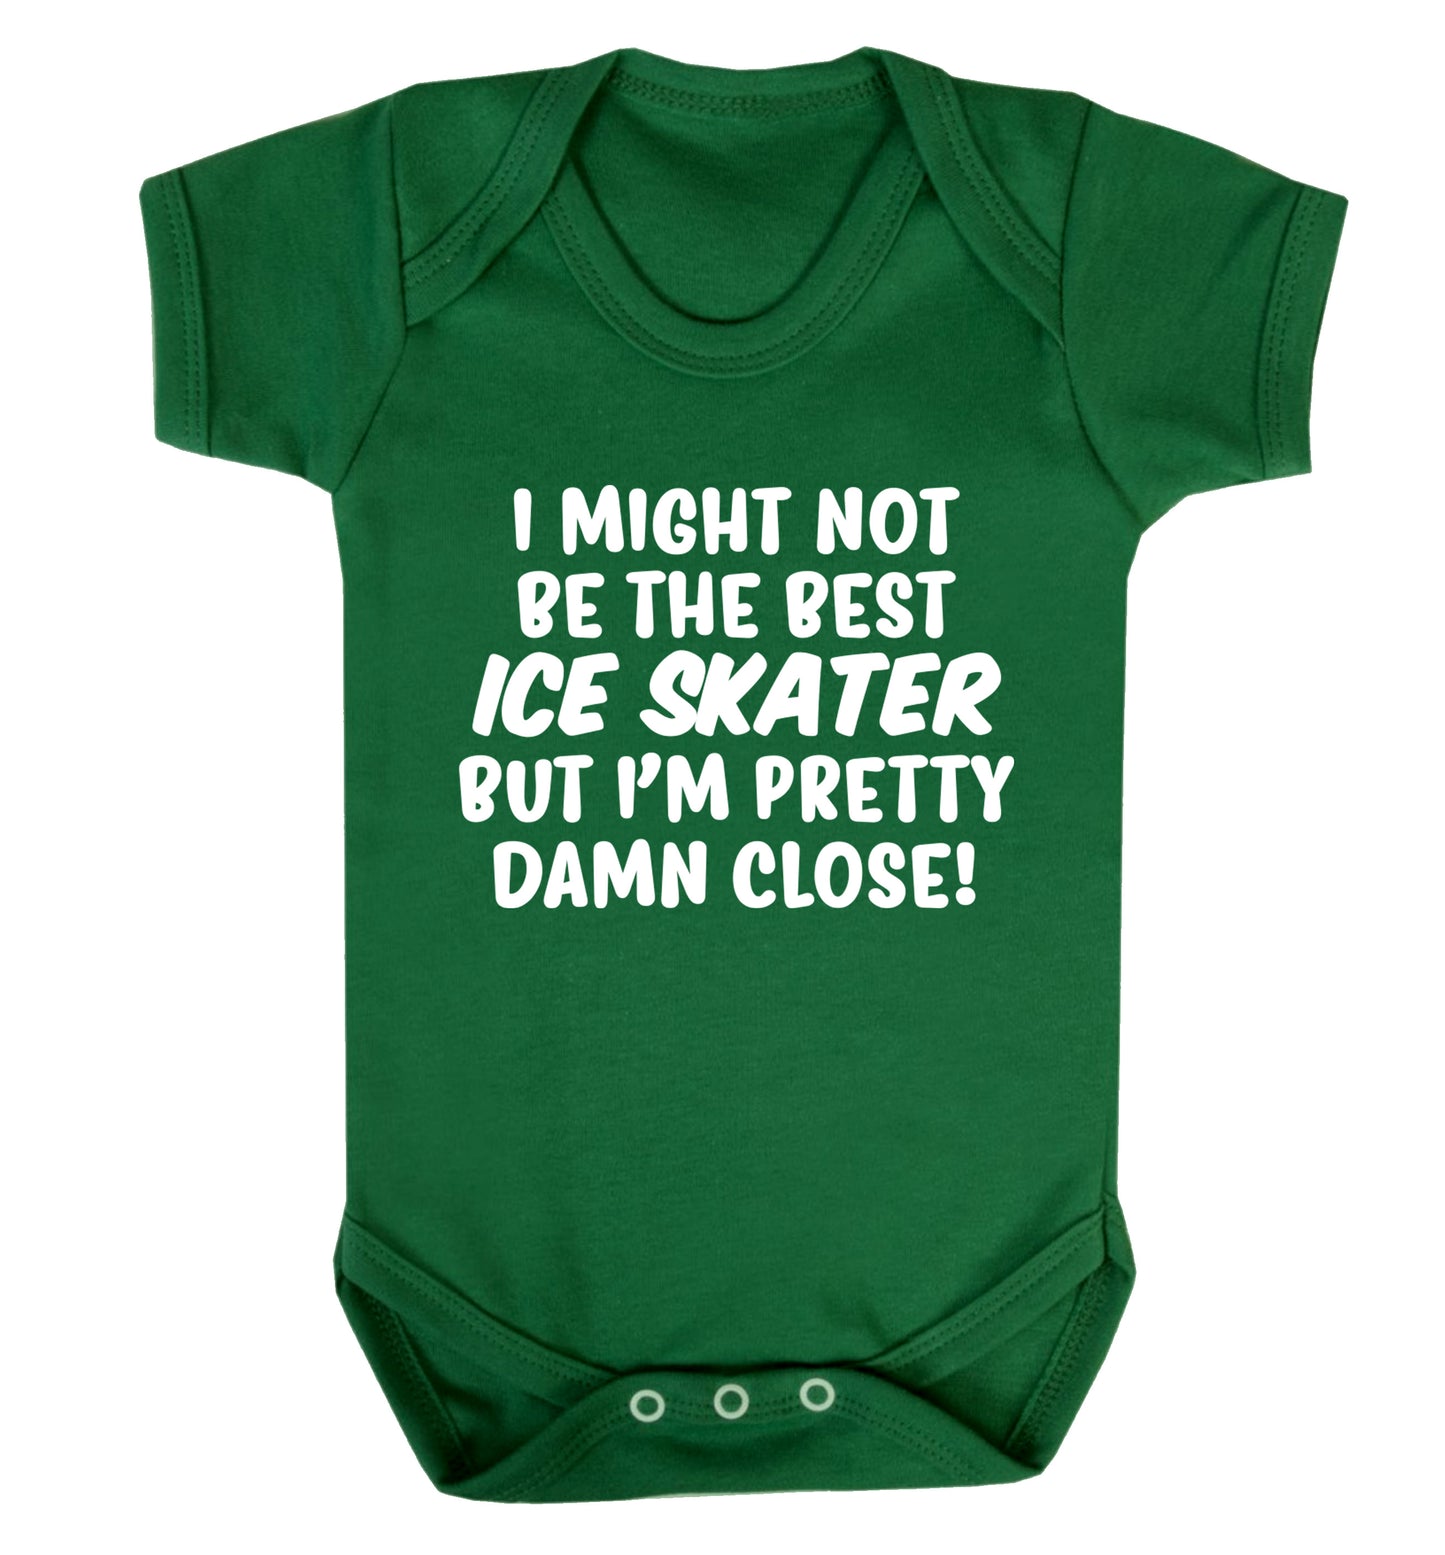 I might not be the best ice skater but I'm pretty damn close! Baby Vest green 18-24 months